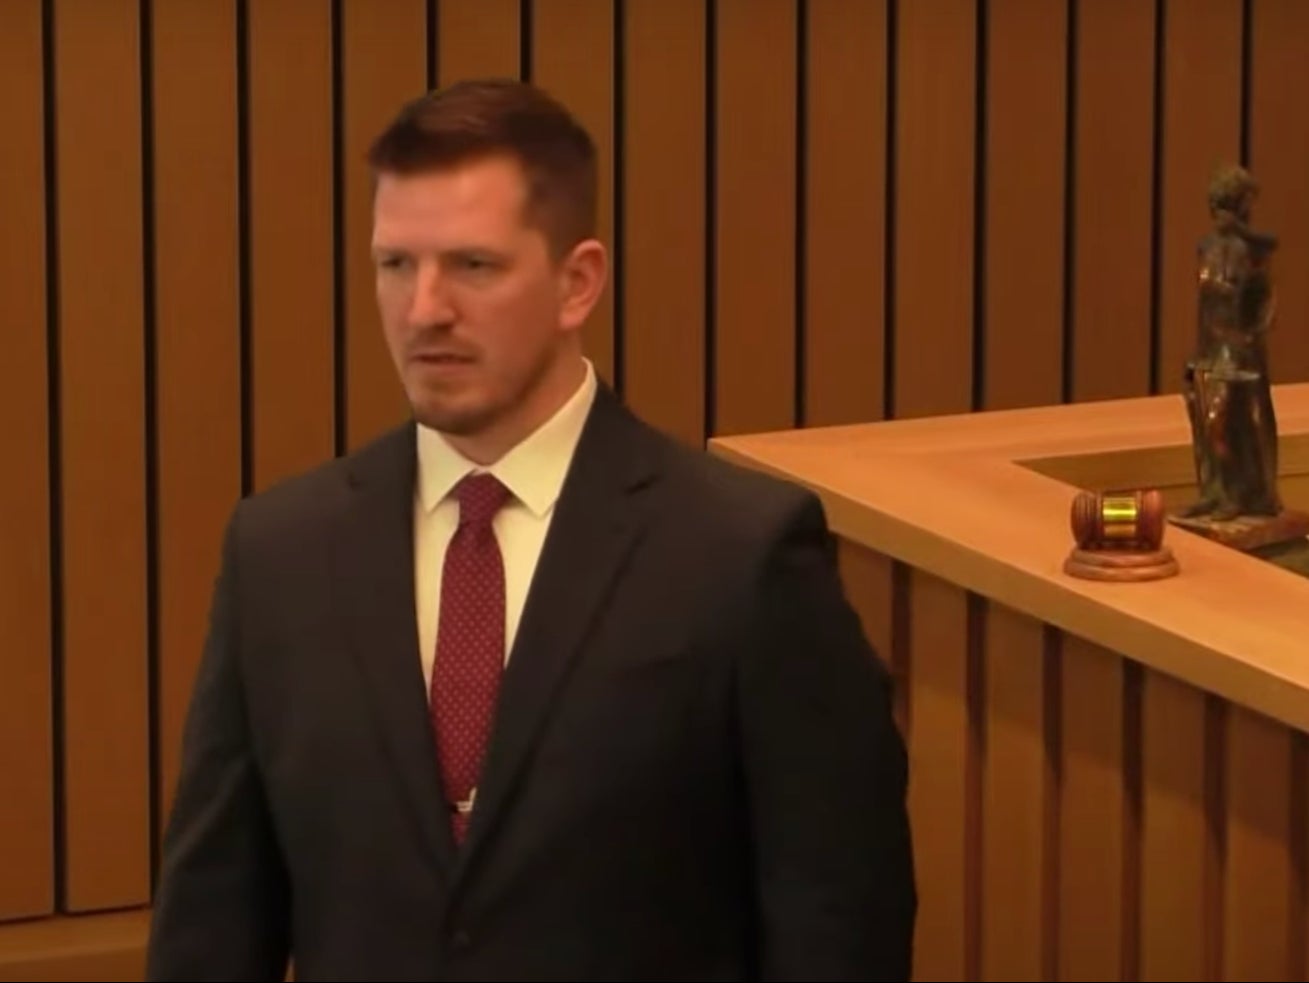 Deputy District Attorney Shawn Overstreet delivers his opening argument at Nancy Brophy’s trial on 4 April 2022